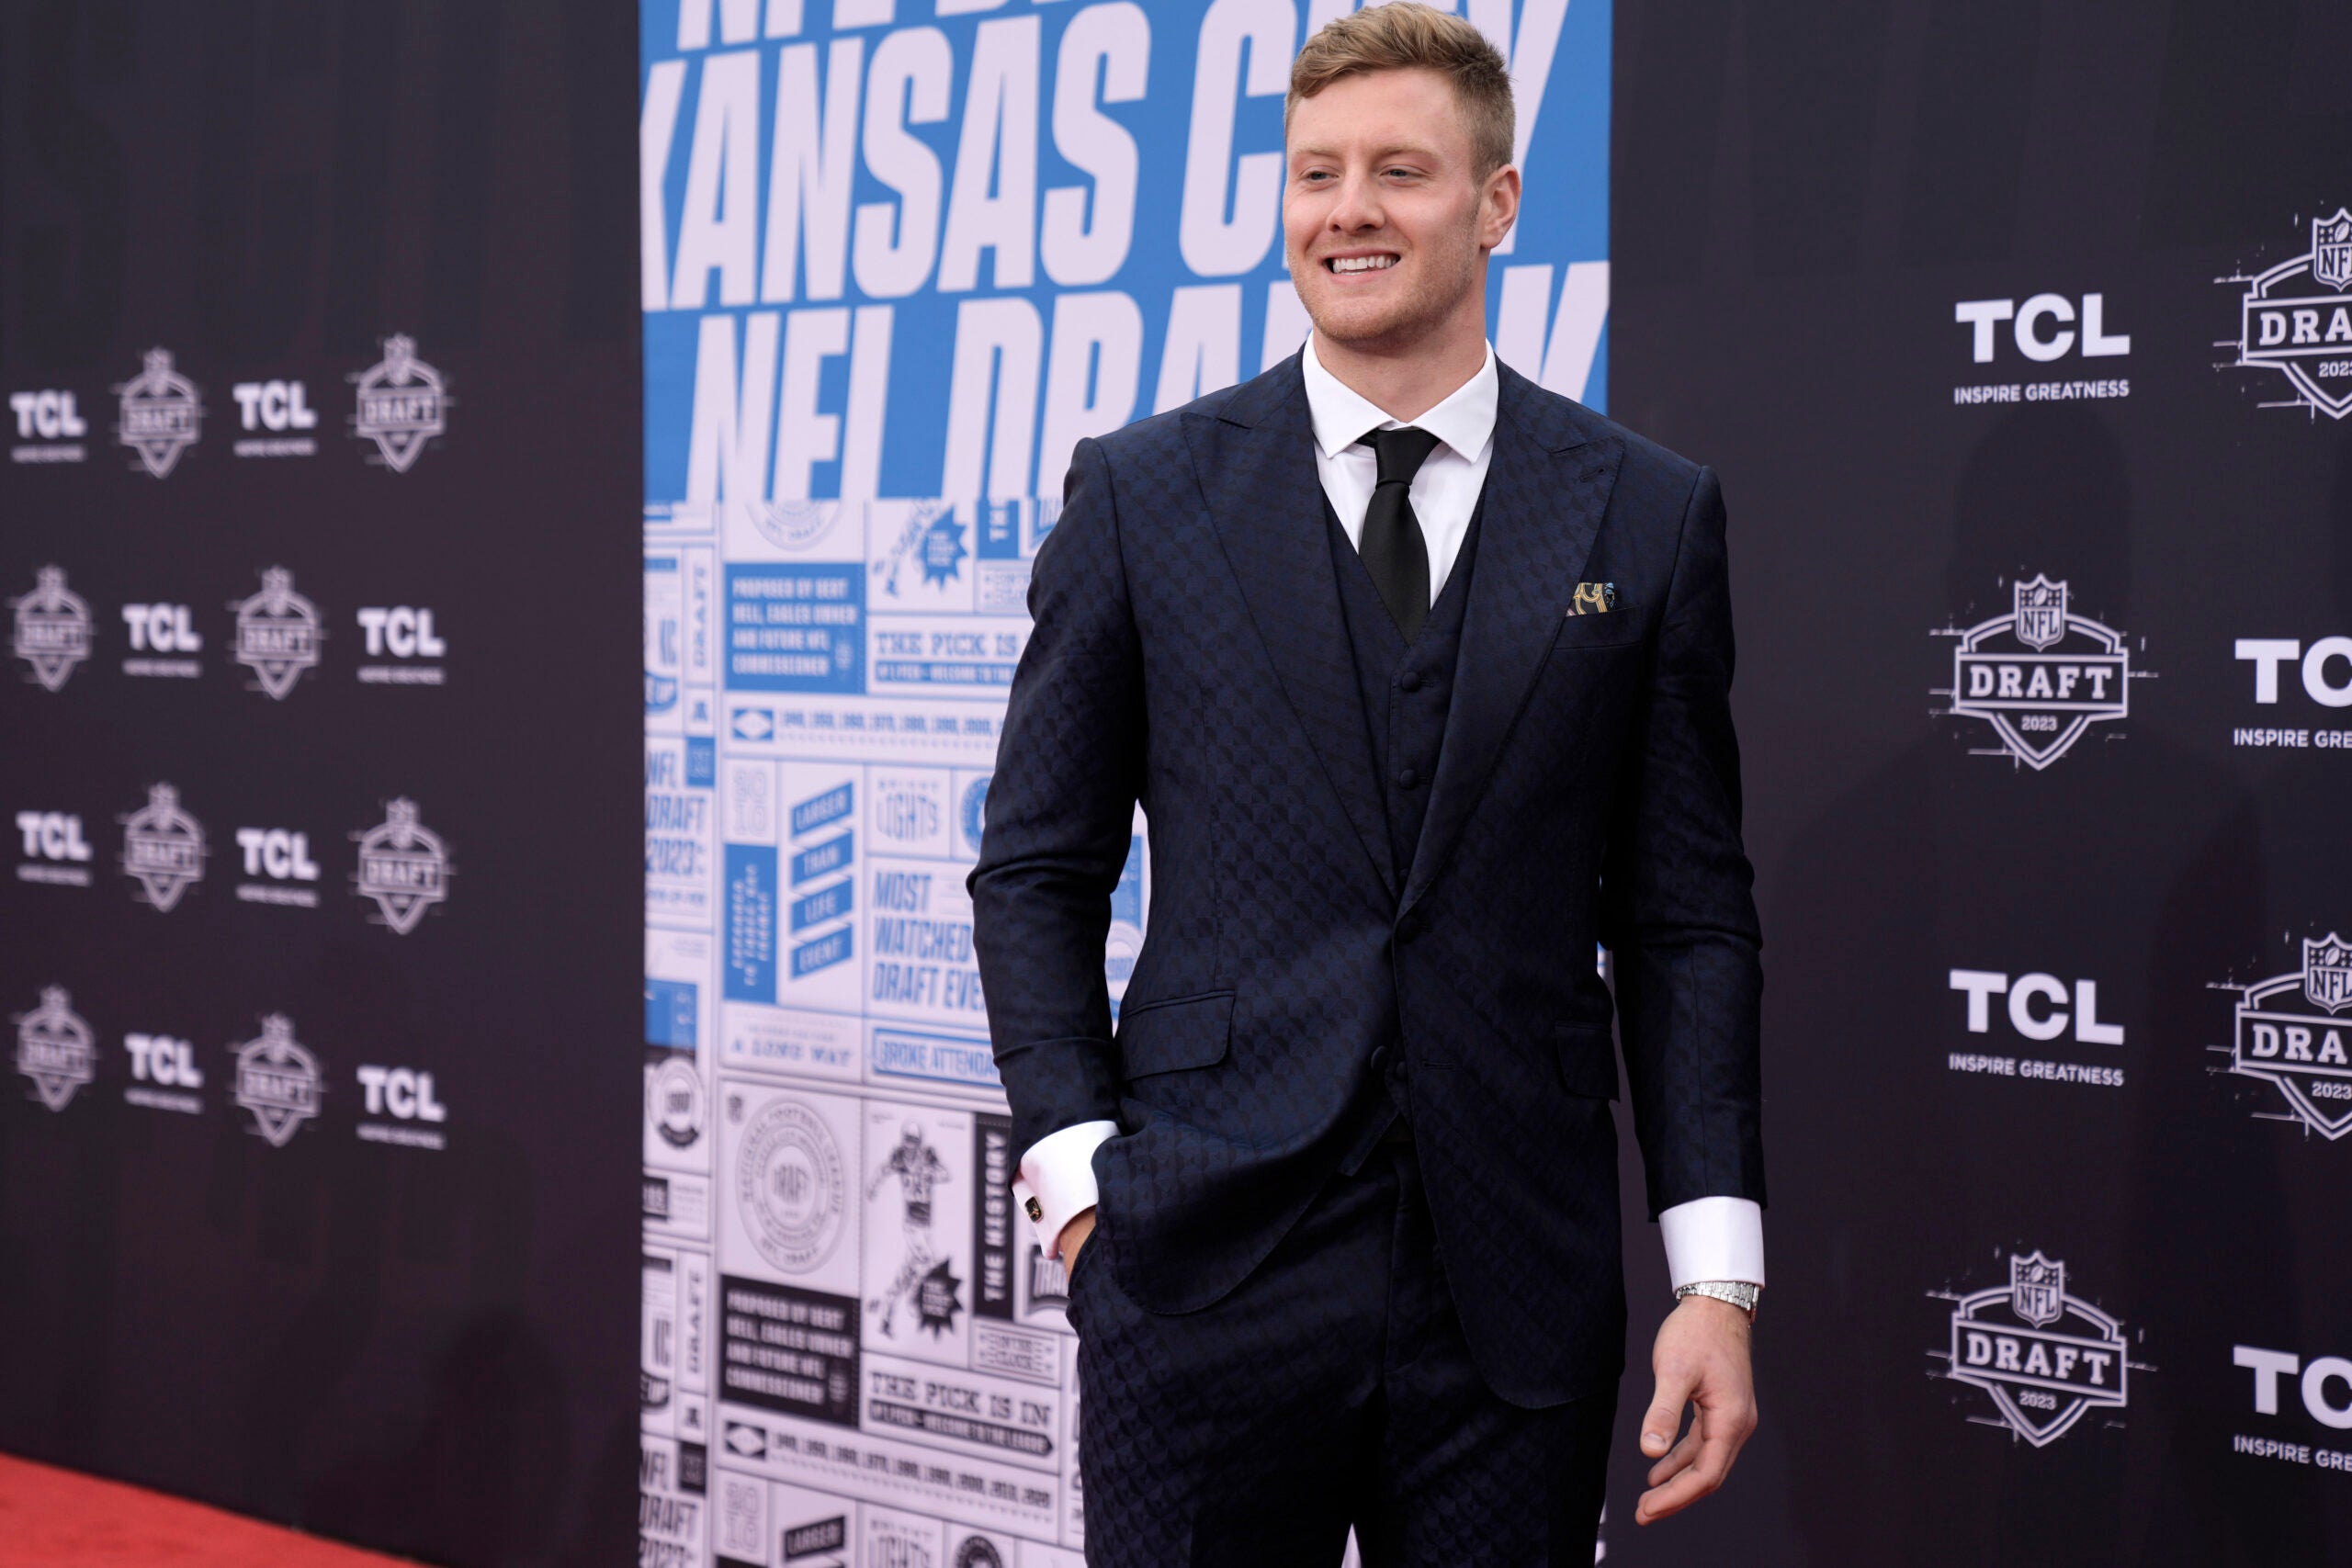 Kentucky quarterback Will Levis at the NFL Draft on Thursday.